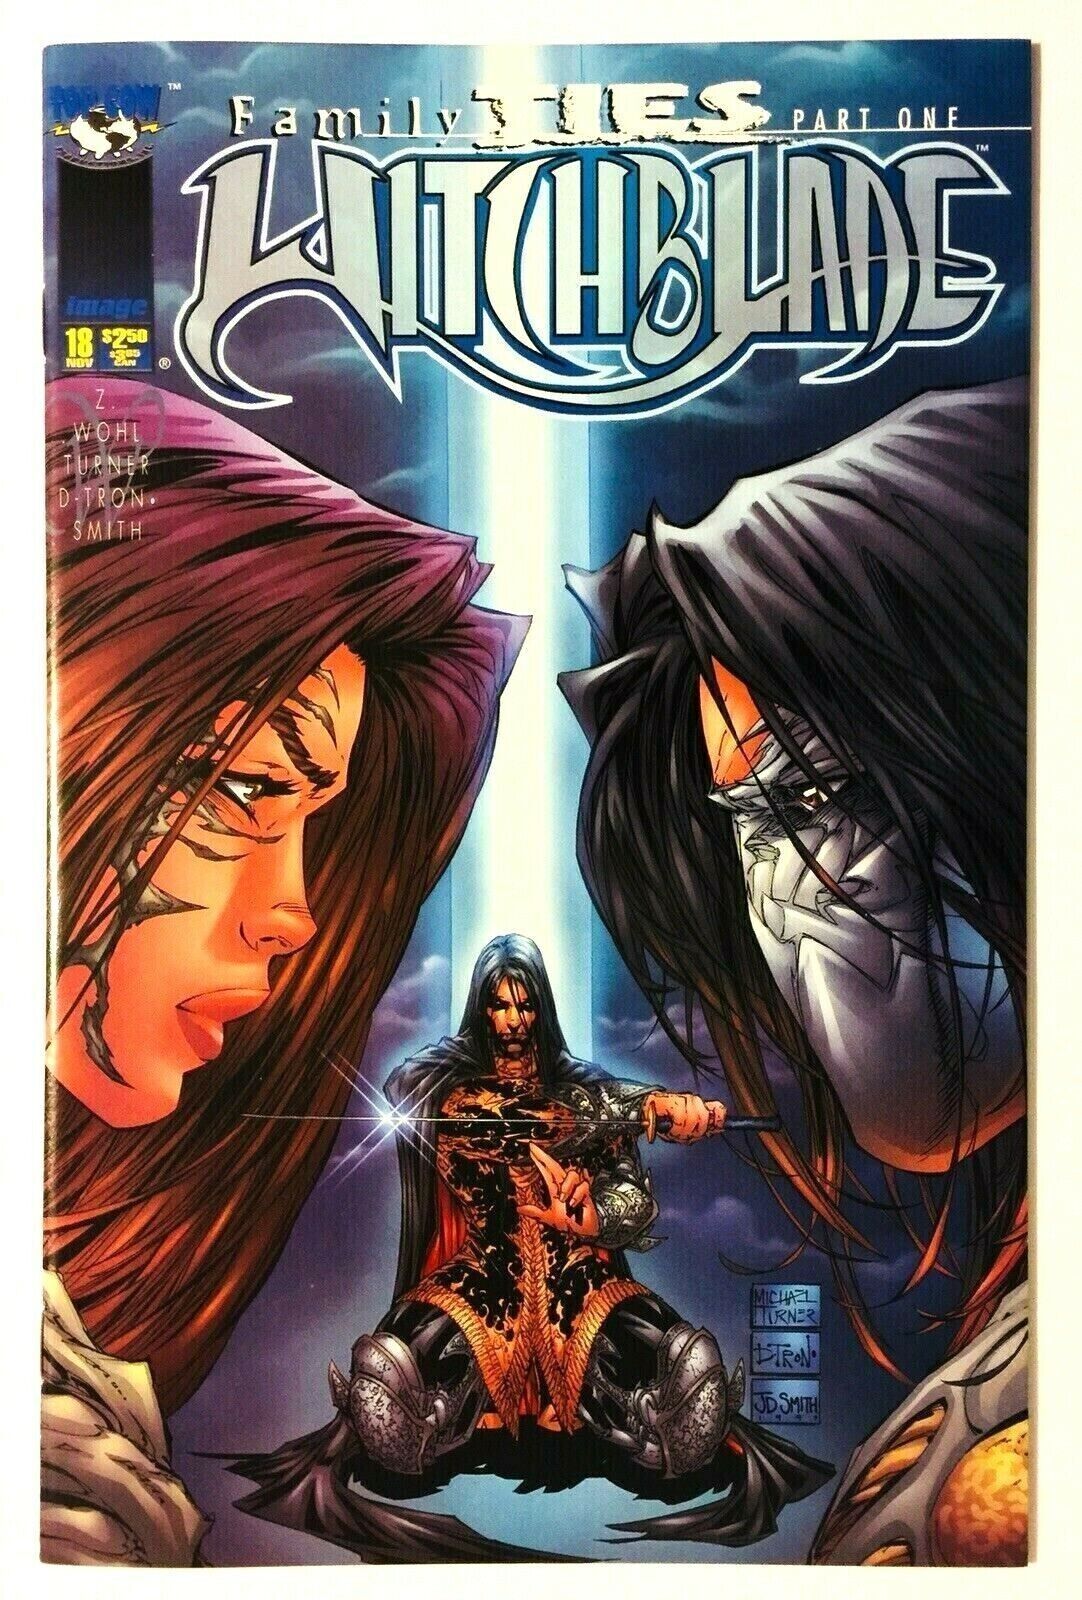 Witchblade #18 Top Cow Image Comic 1997 Darkness Turner Variant VF/NM